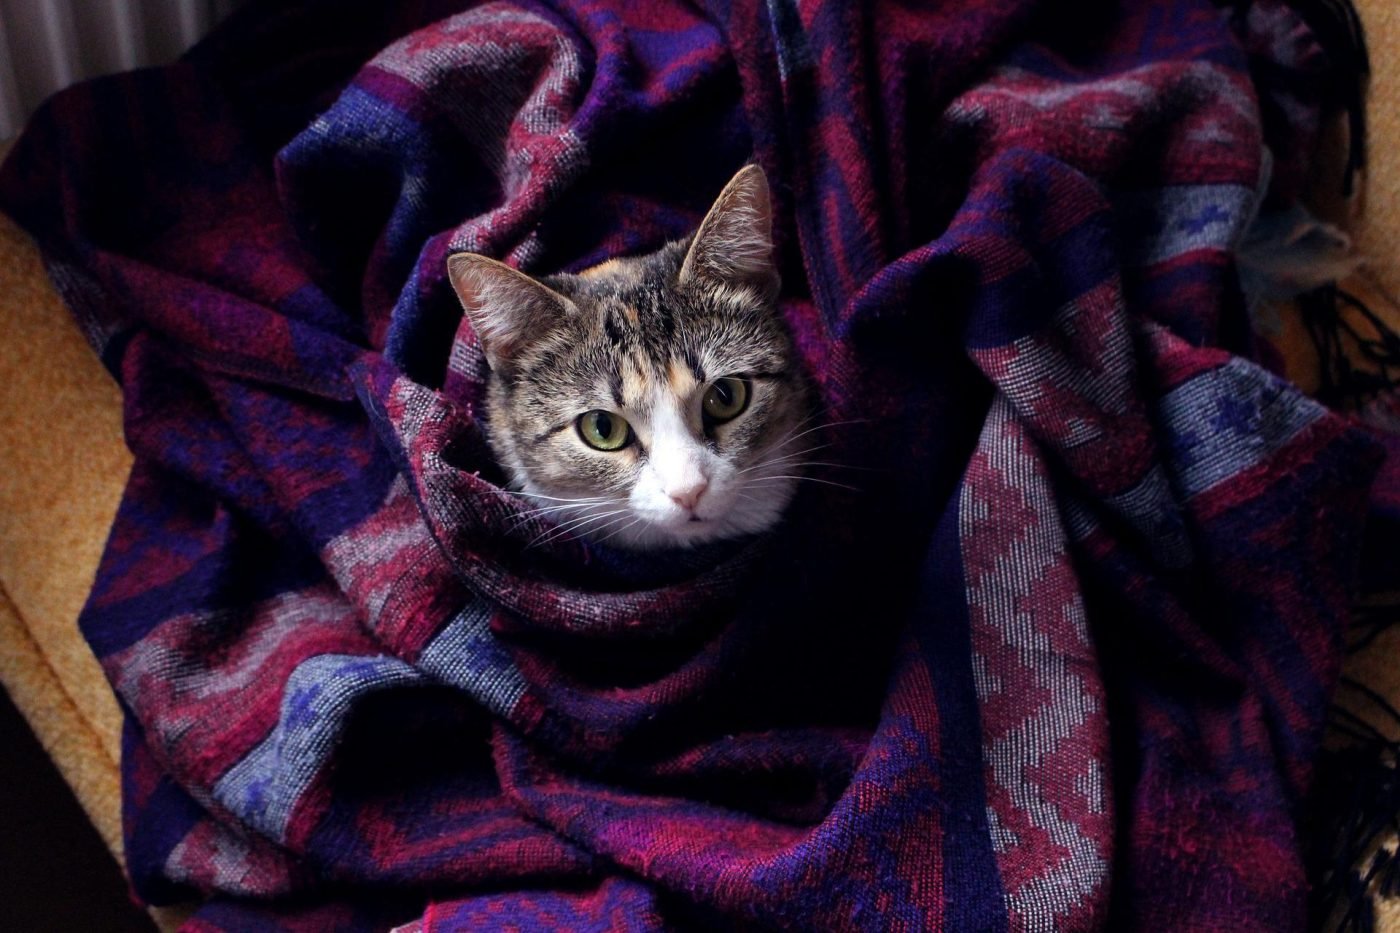 Why Do Cats Knead and Bite Blankets? (2022) 5 Reasons